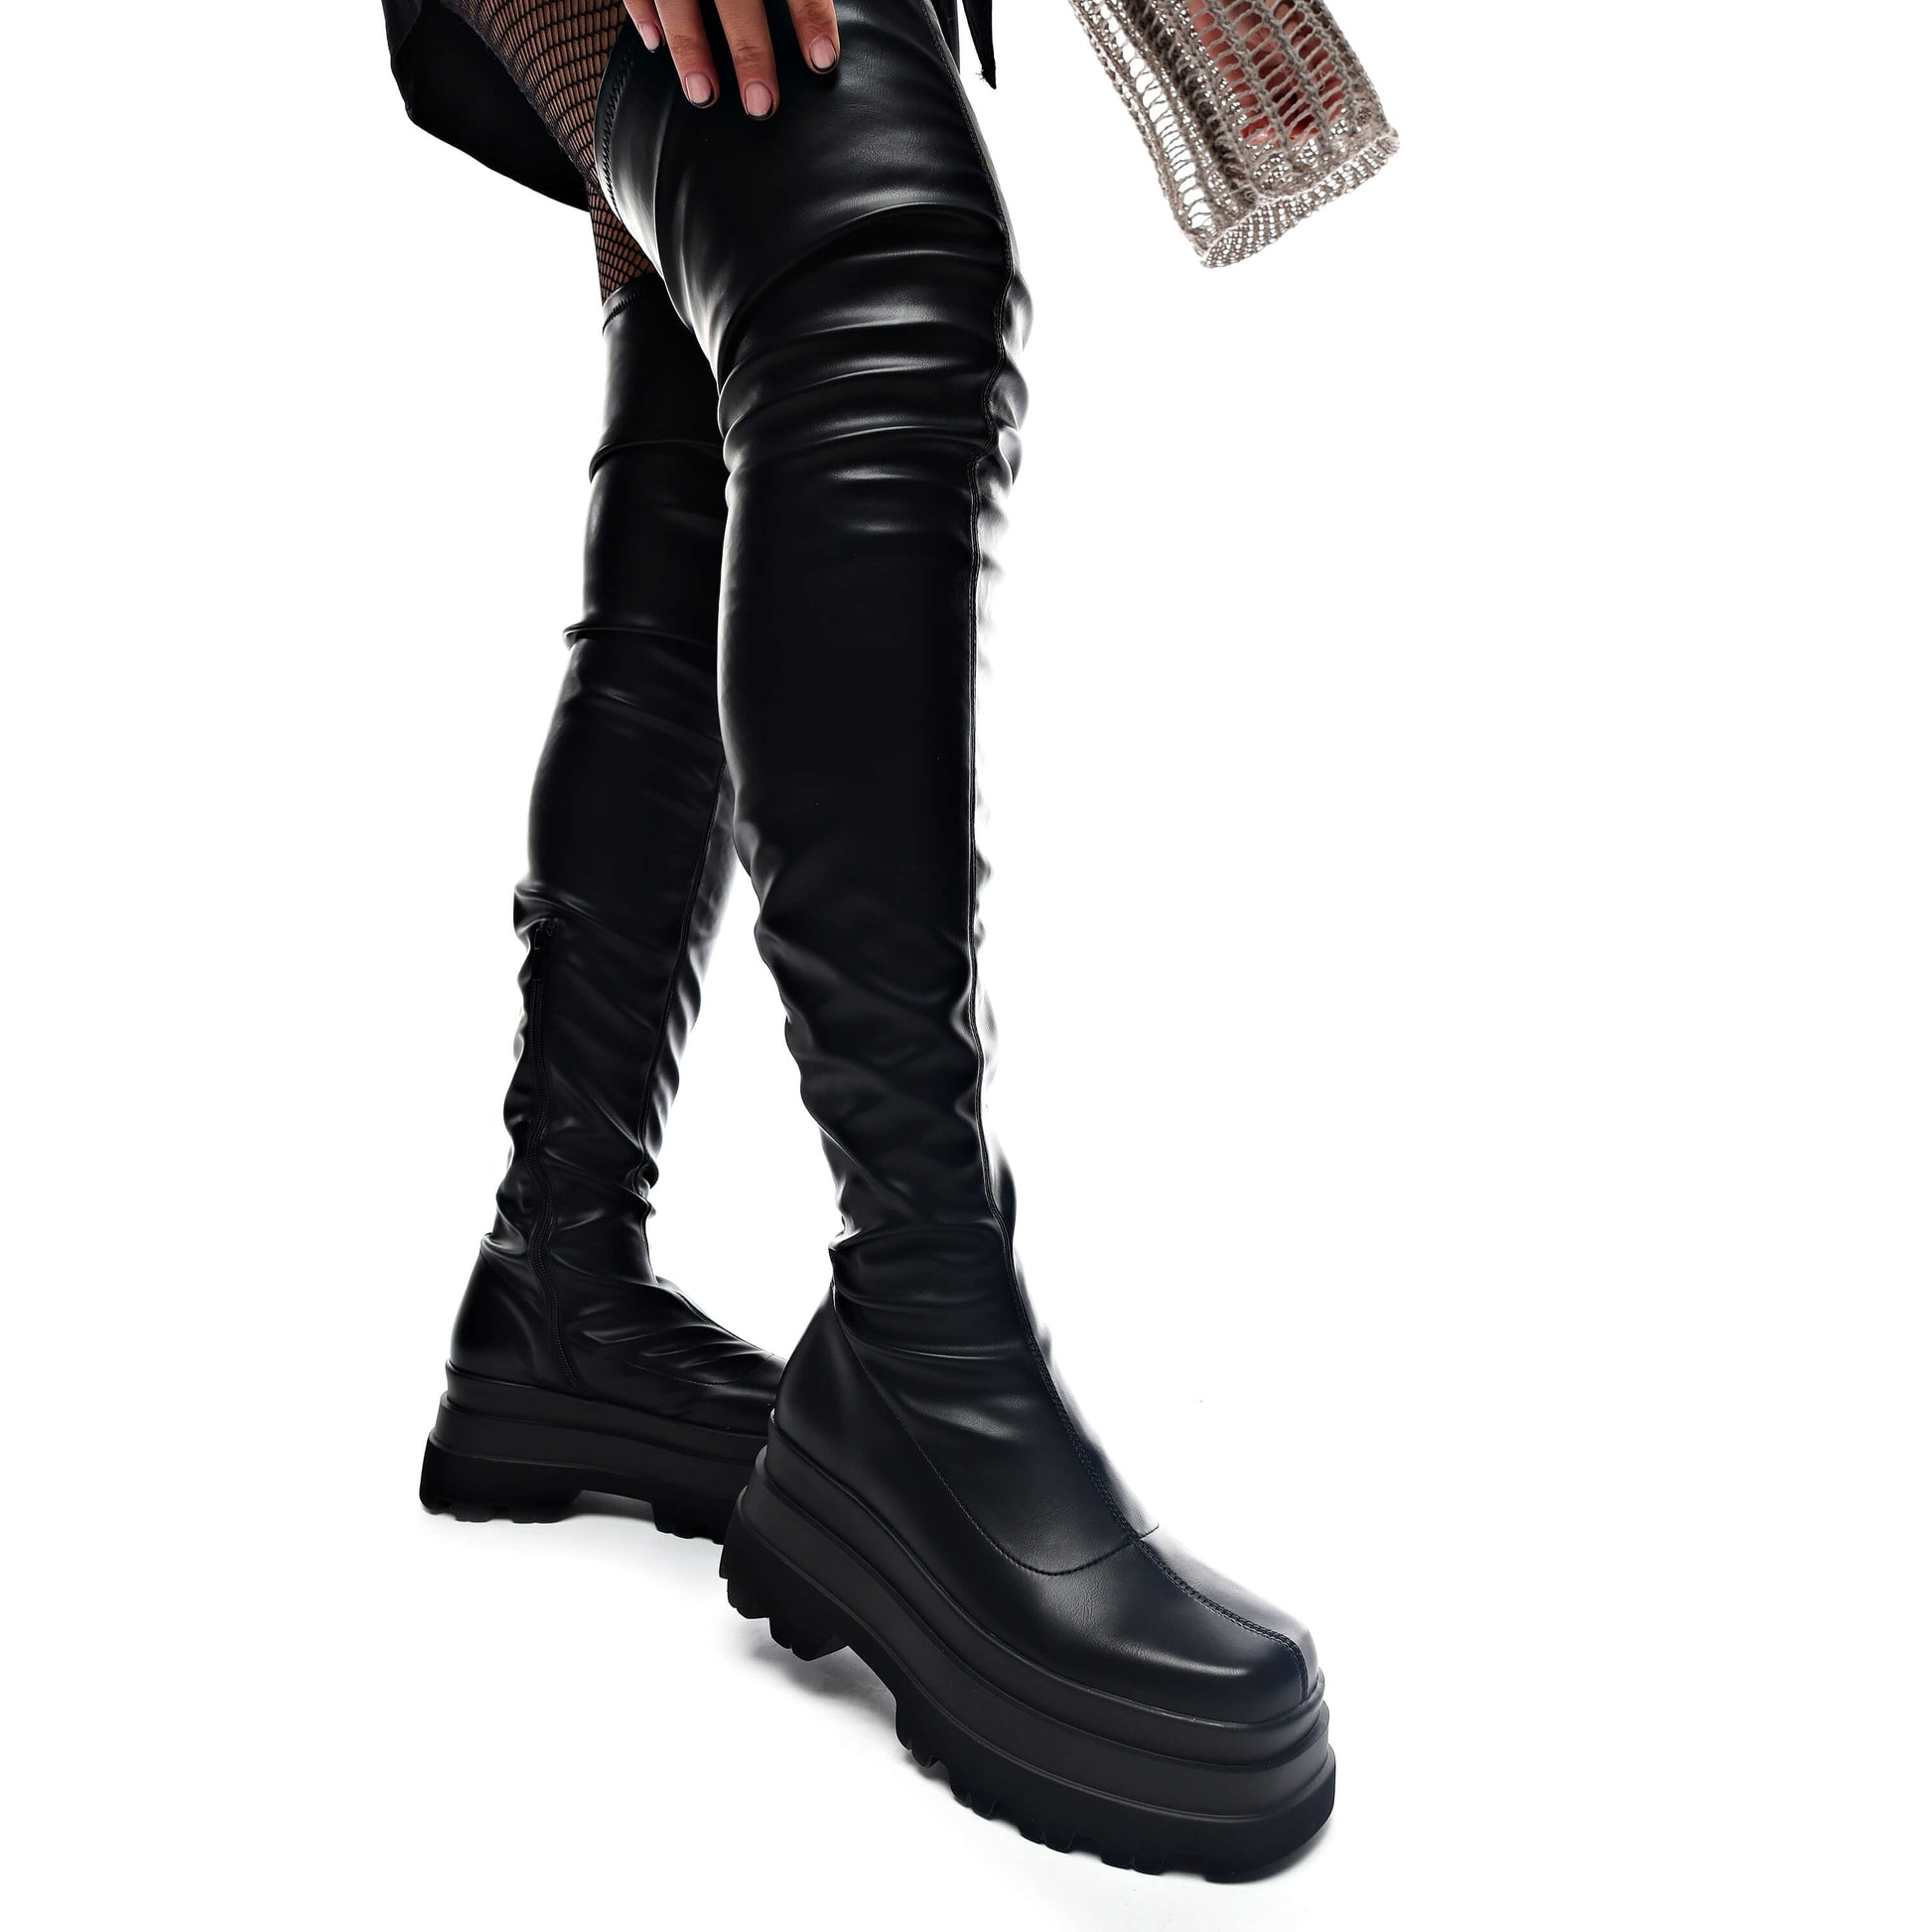 The Elevation Plus Size Thigh High Boots - Long Boots - KOI Footwear - Black - Model Side View